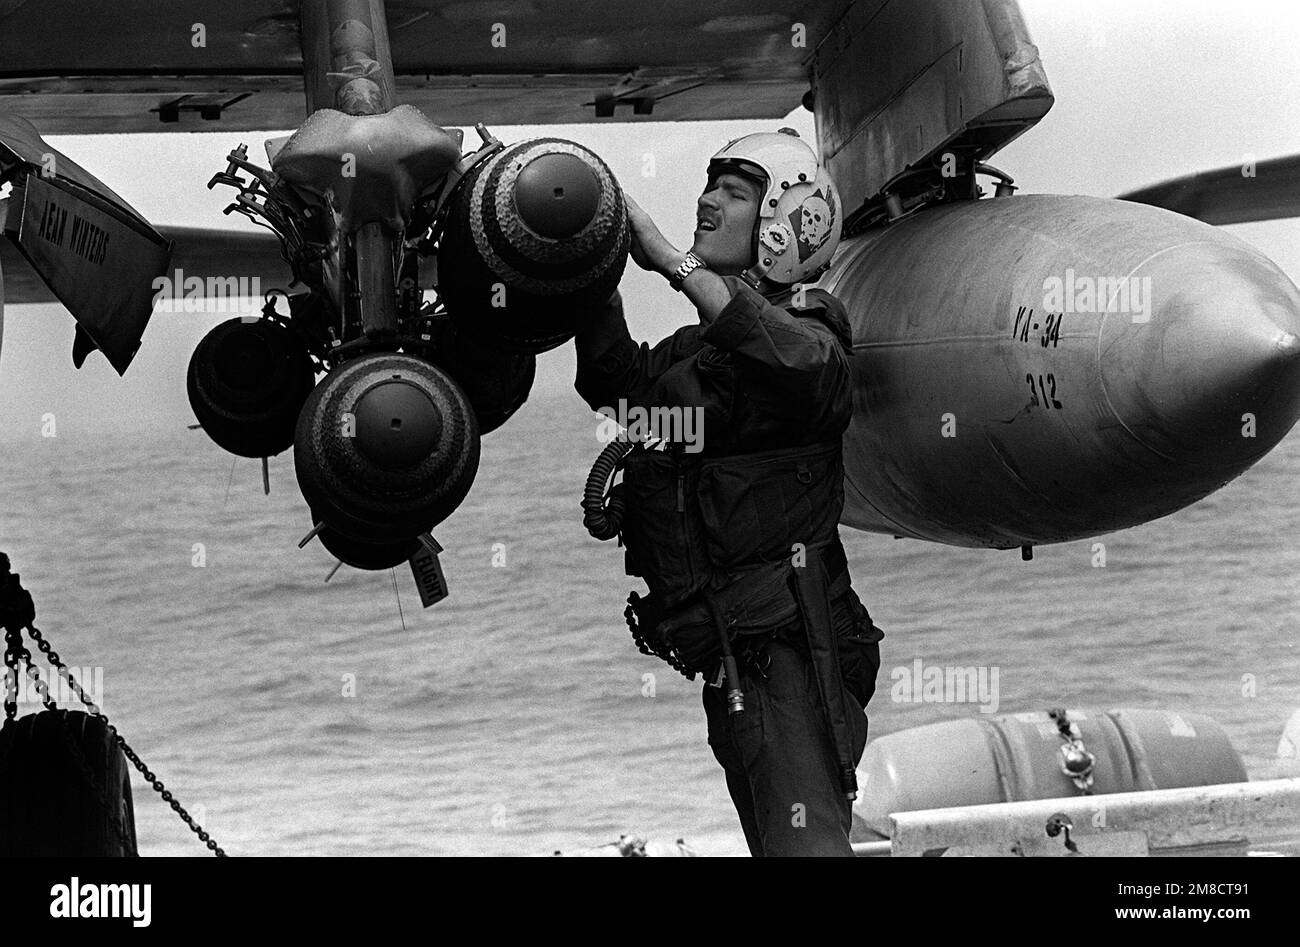 An Attack Squadron 34 (VA-34) pilot conducts a preflight check of the bombs hung on a wing pylon of his A-6E Intruder aircraft aboard the nuclear-powered aircraft carrier USS DWIGHT D. EISENHOWER (CVN-69) during Fleet Ex '90. Country: Atlantic Ocean (AOC) Stock Photo